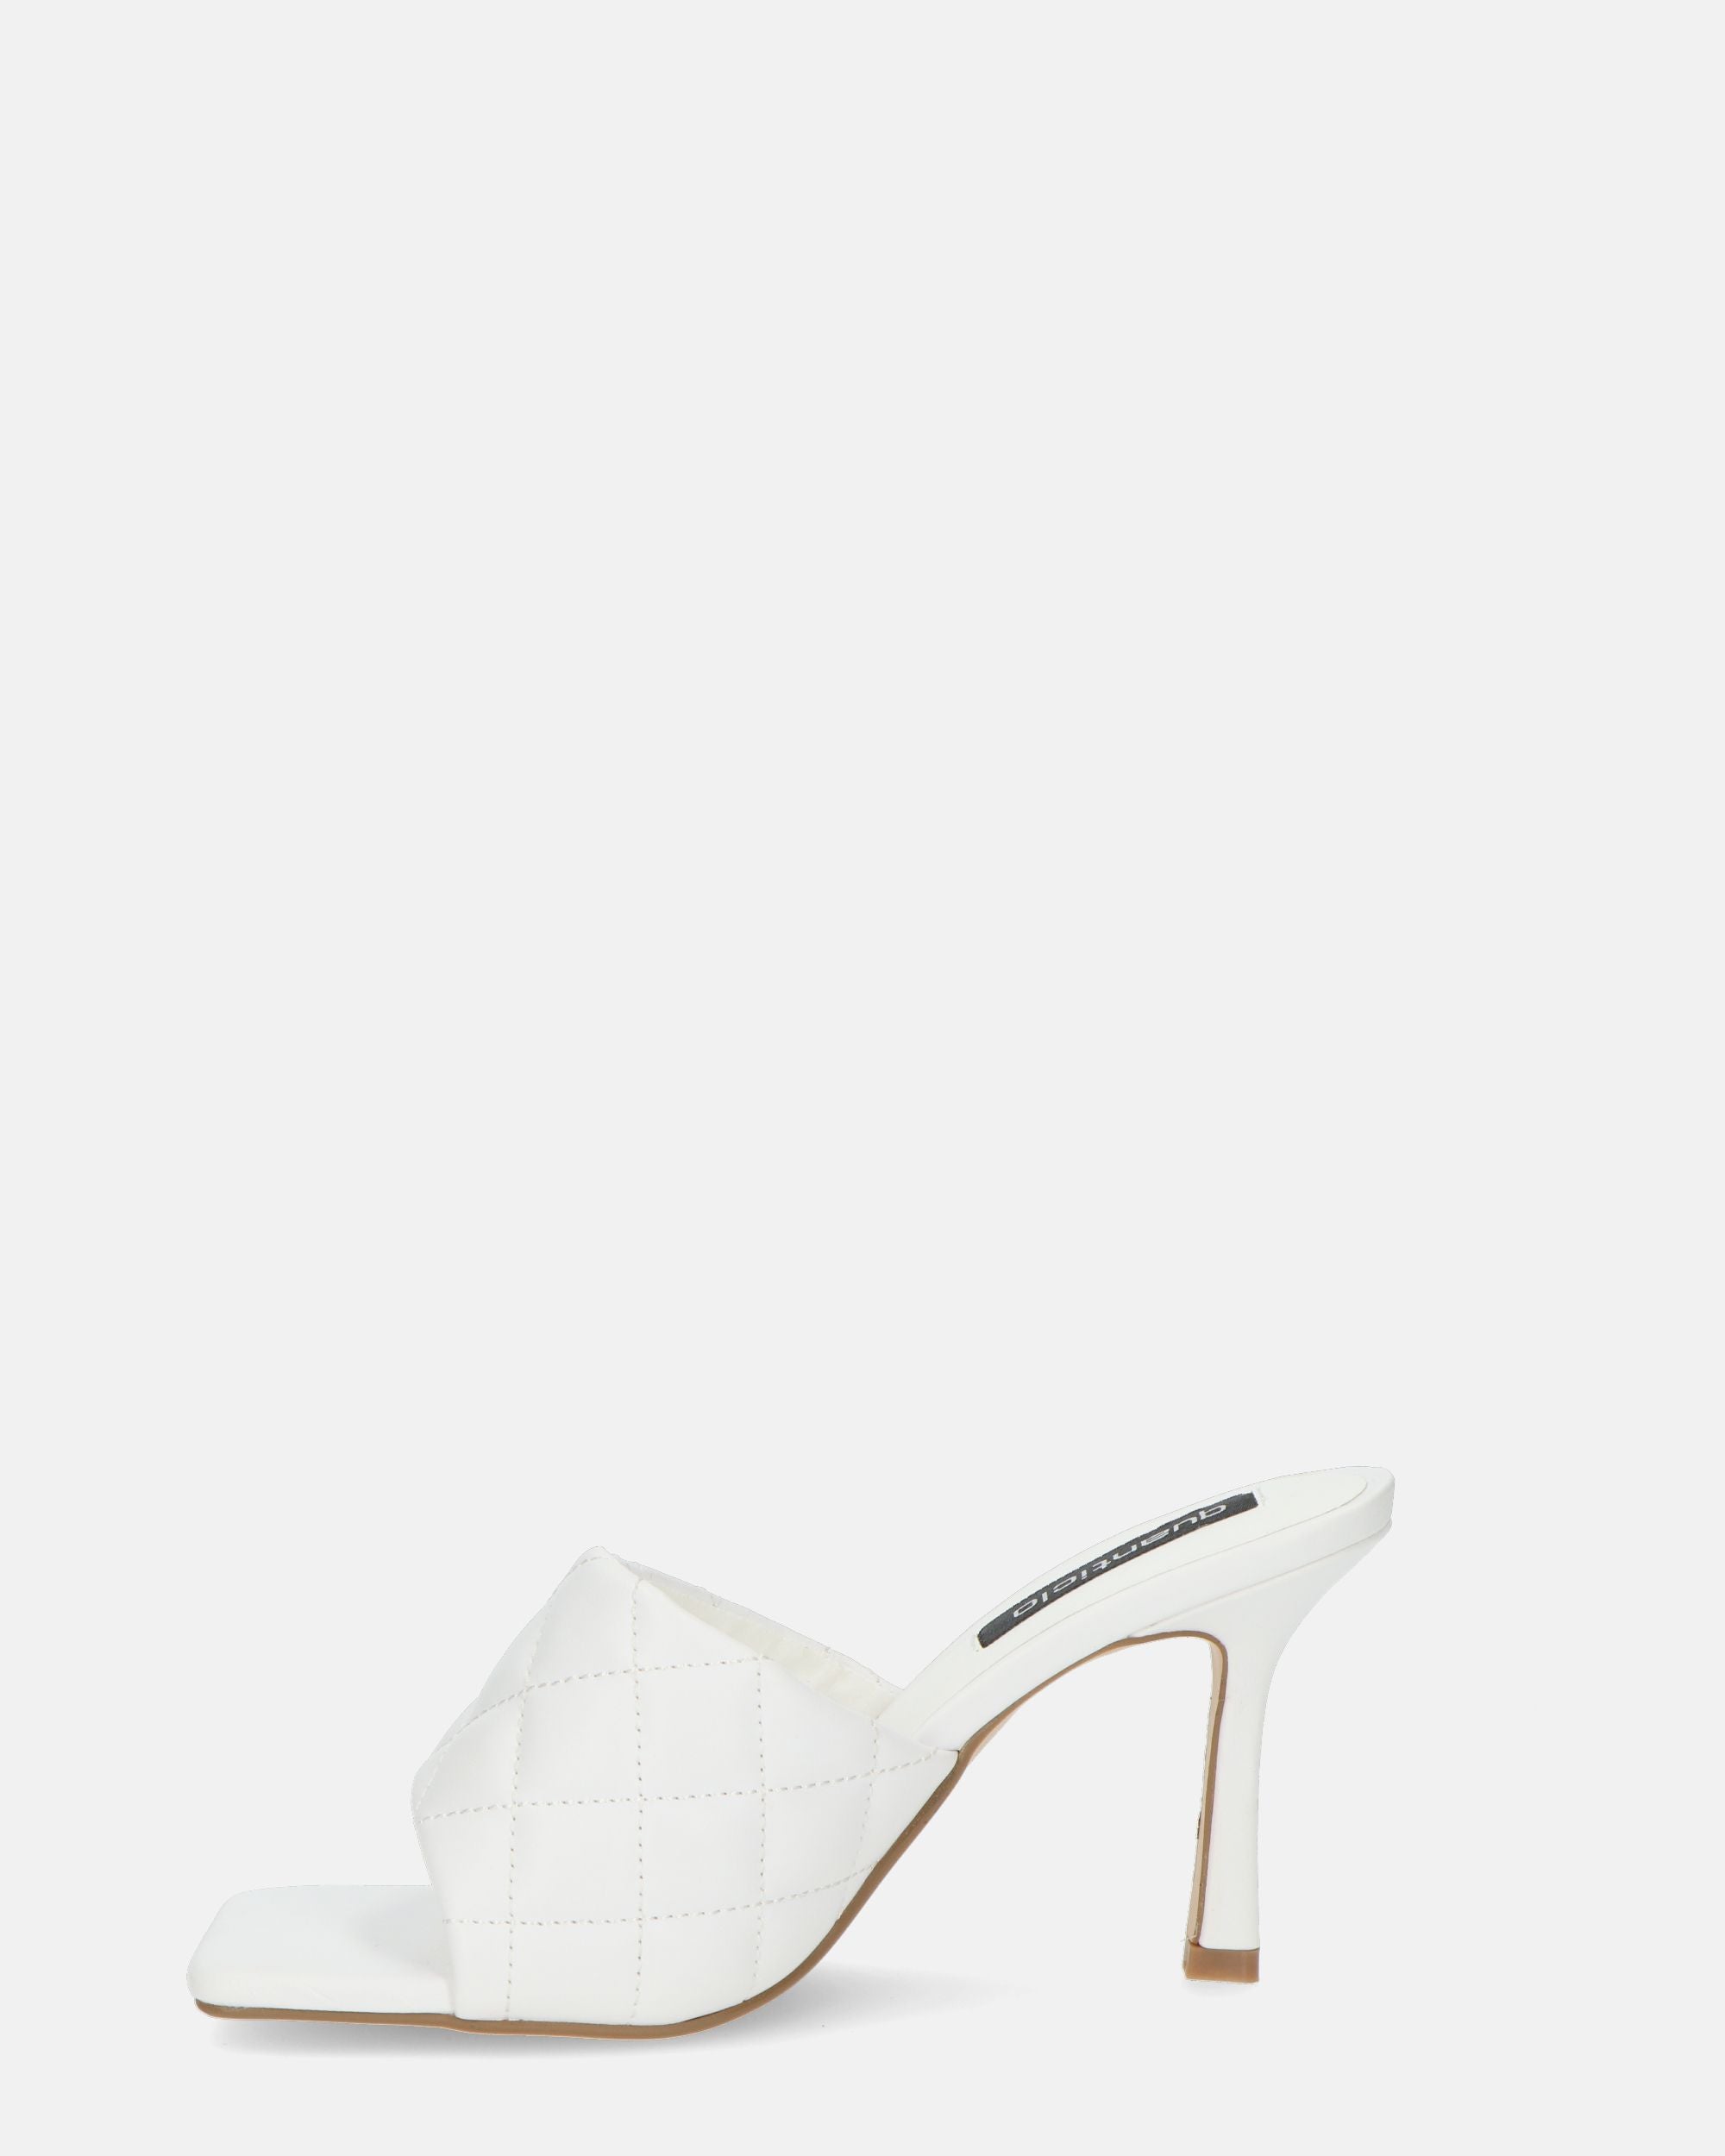 GABY - white stiletto heel with band and stitching